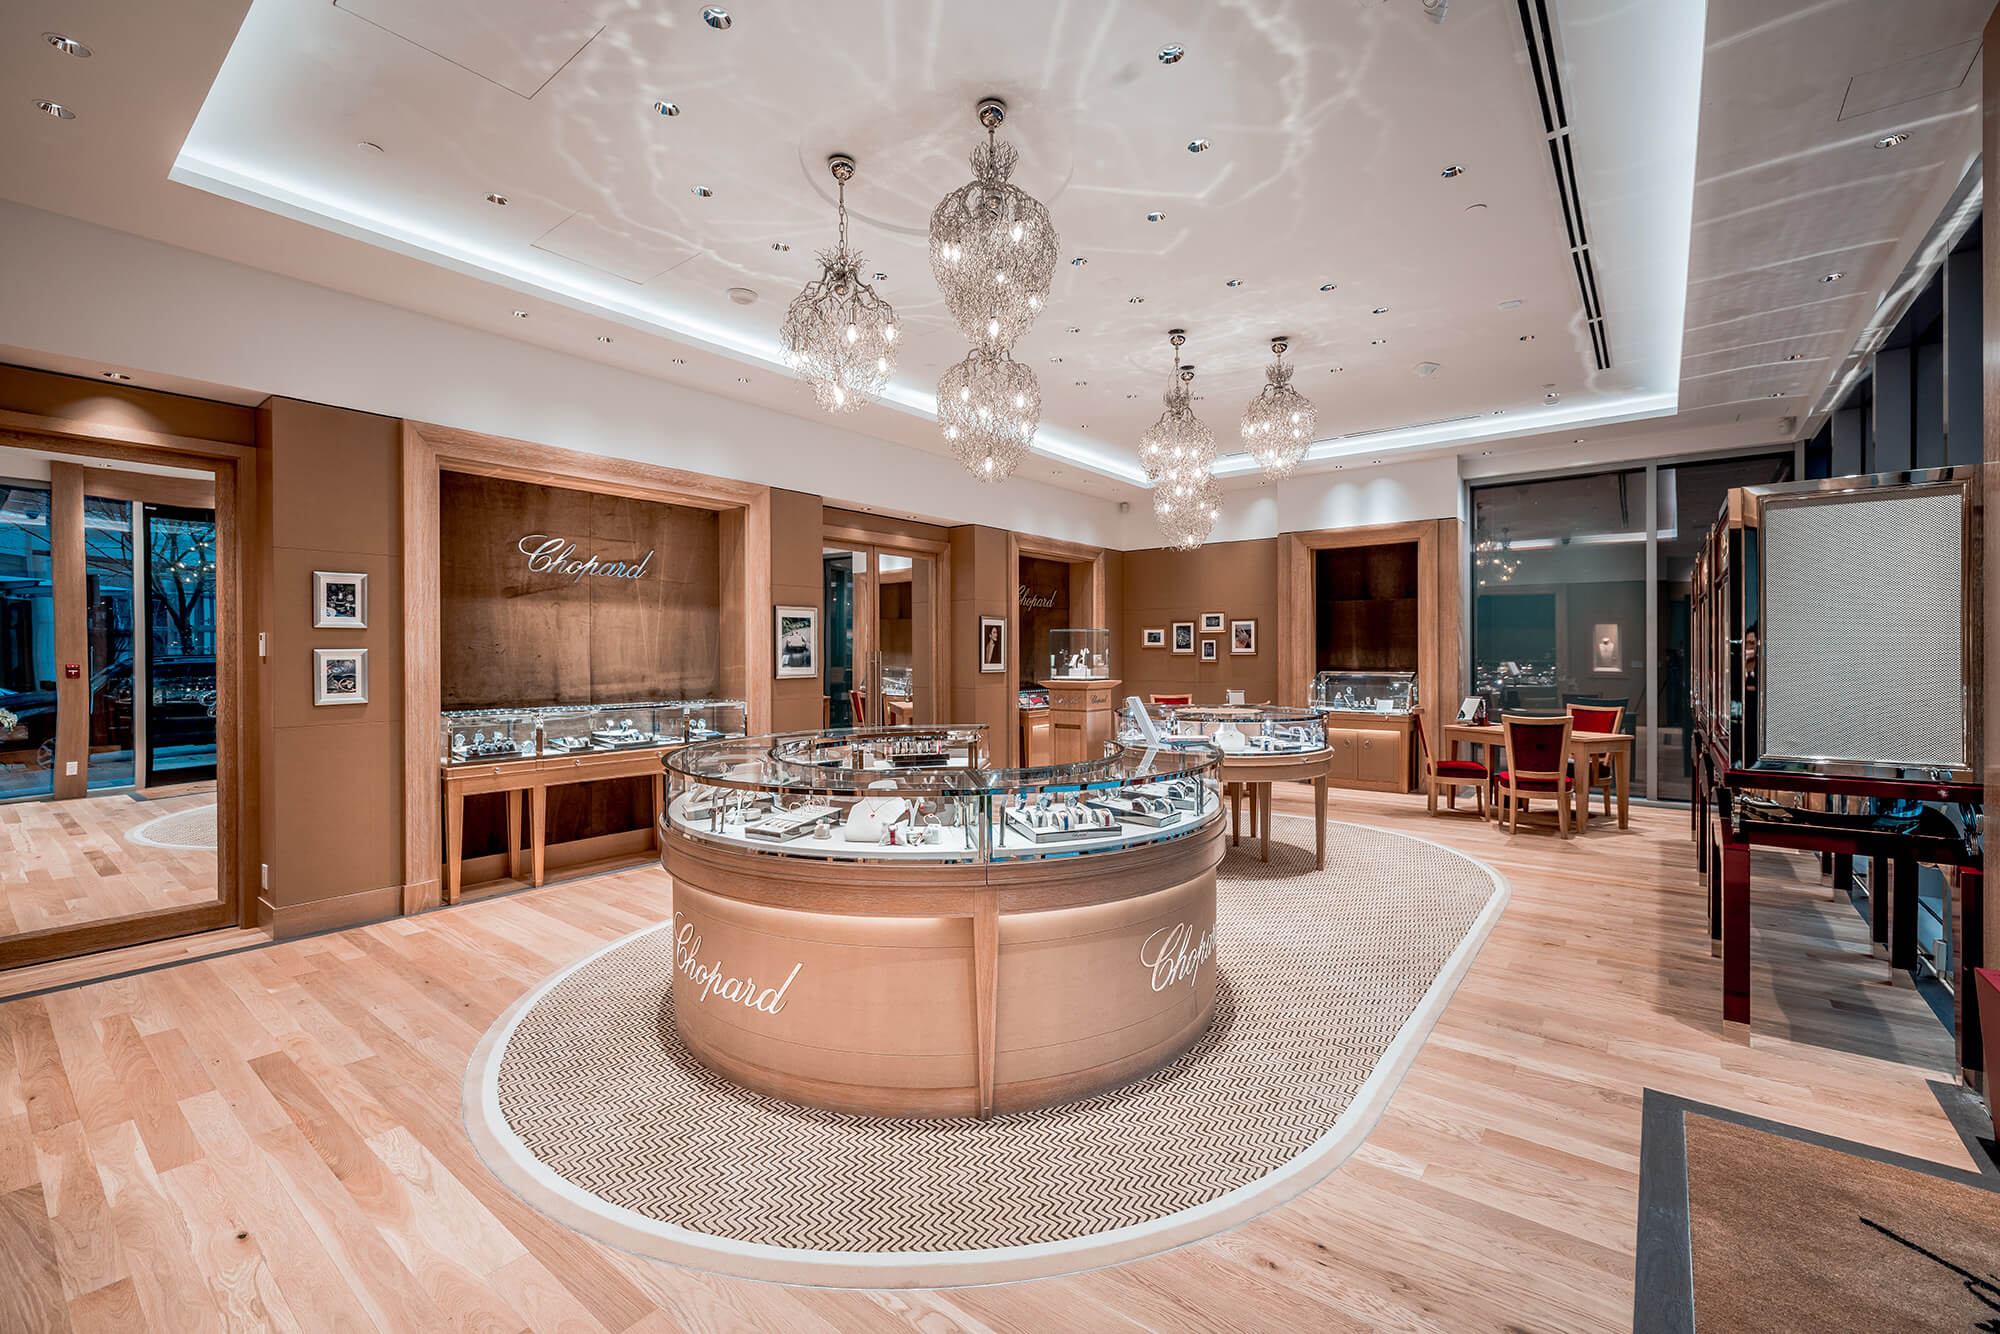 chopard boutique photo - global watch company